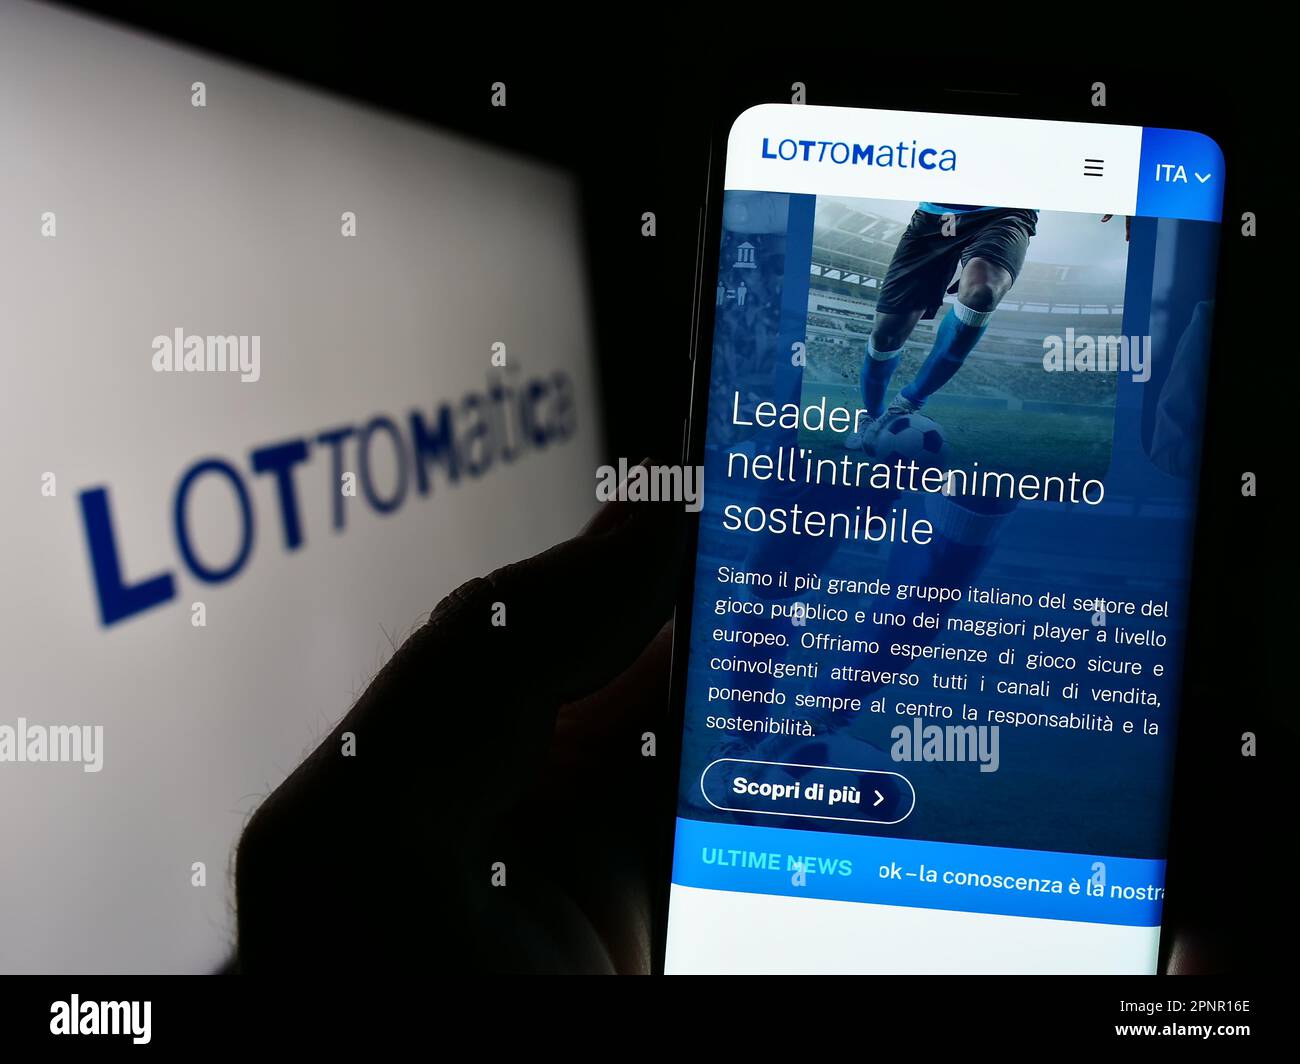 Person holding smartphone with website of Italian gambling company Lottomatica S.p.A. on screen with logo. Focus on center of phone display. Stock Photo